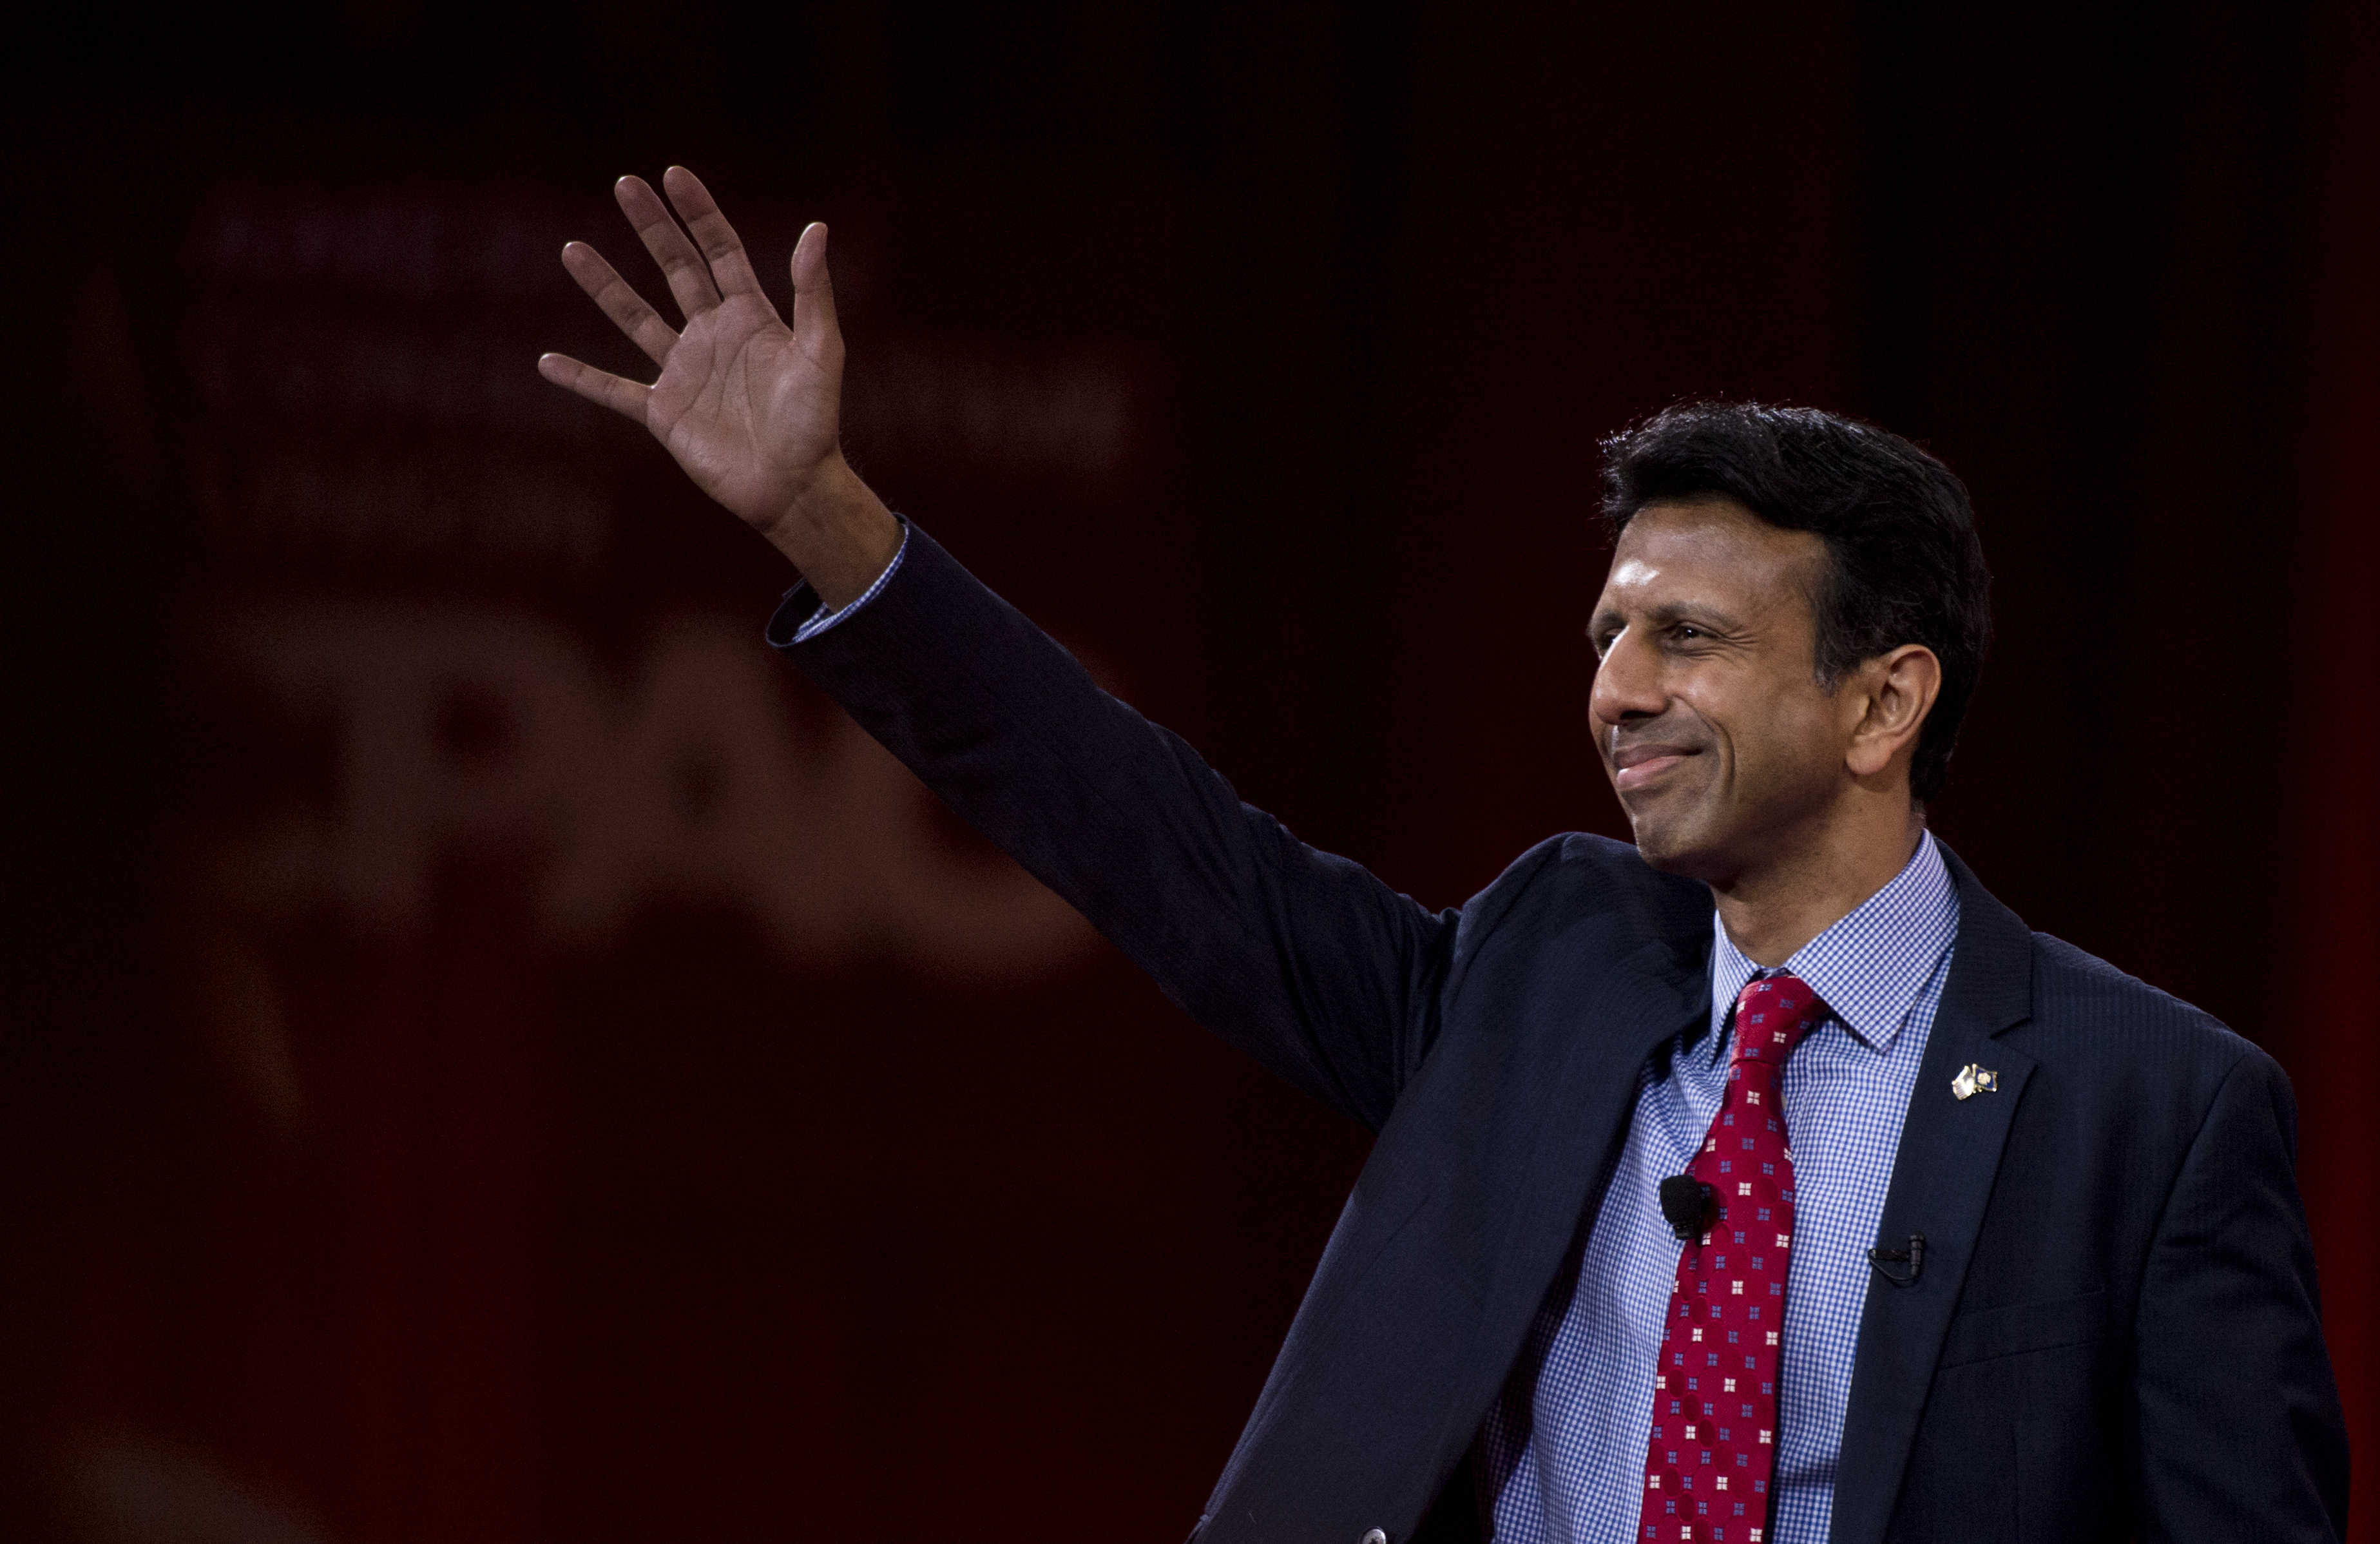 Gov. Bobby Jindal, R-La., speaks at CPAC in National Harbor, Md. on Feb. 26, 2015. (Bill Clark—CQ-Roll Call/Getty Images)